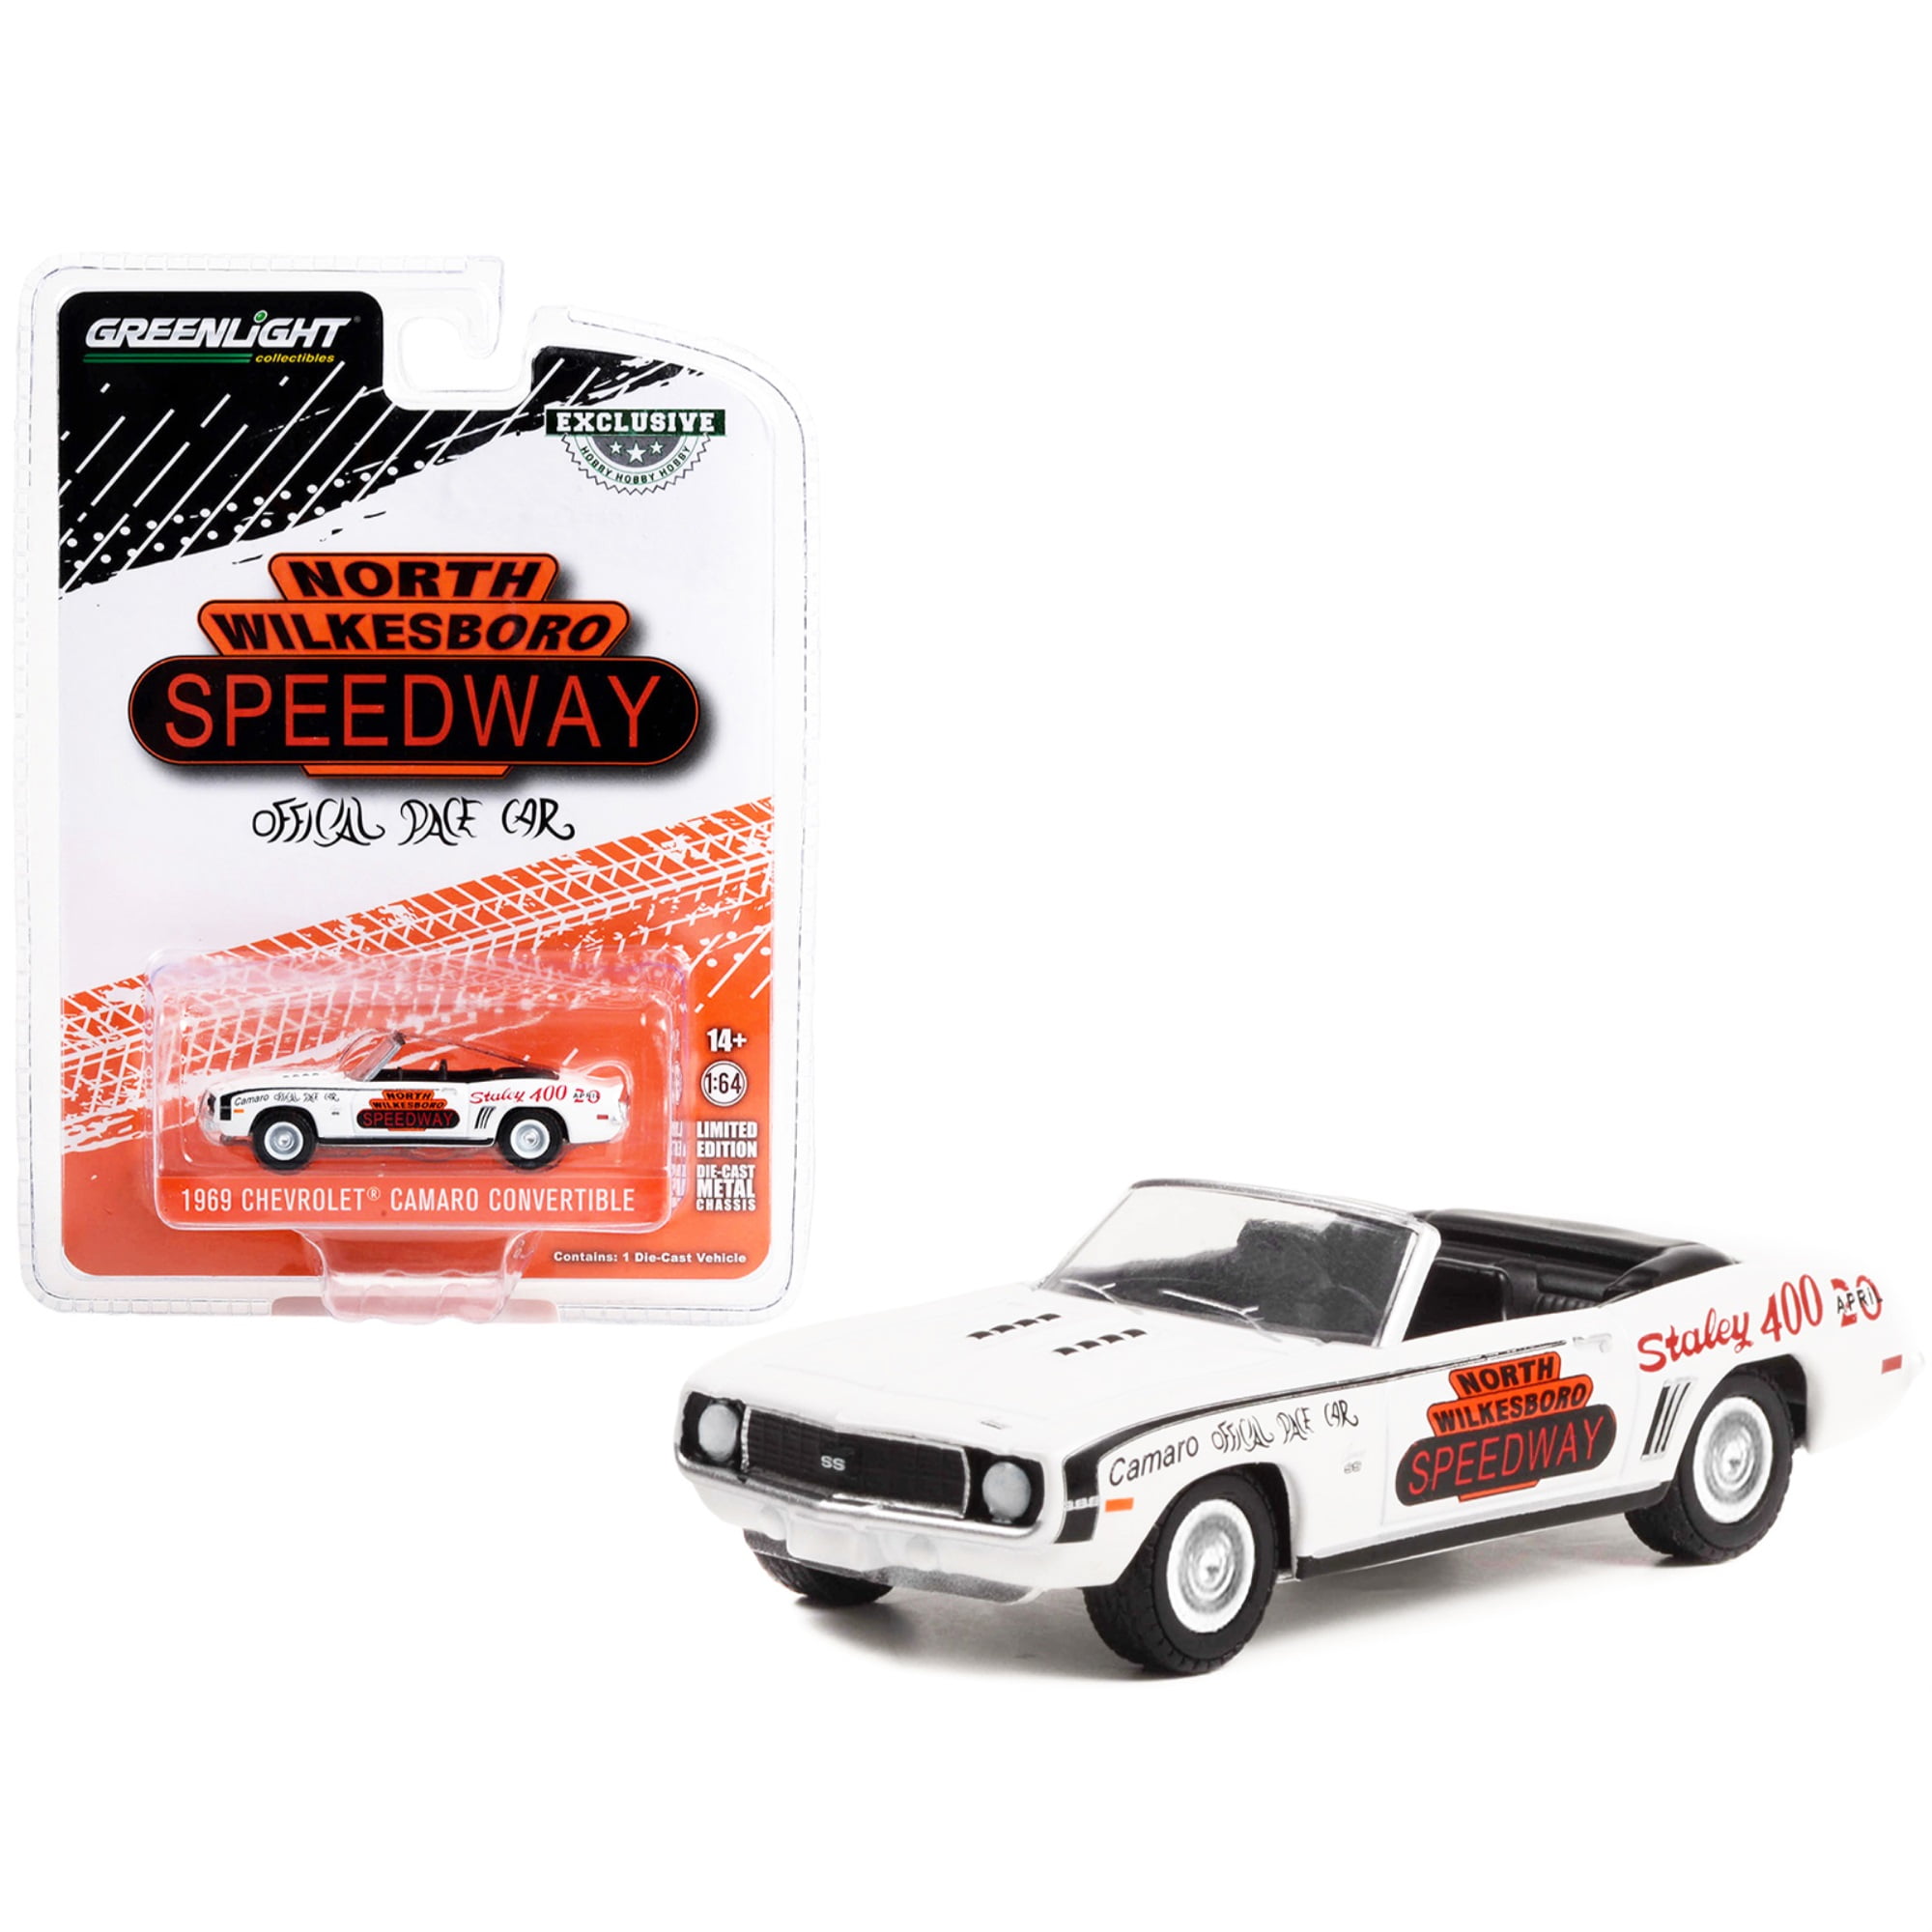 30346 1969 Chevrolet Camaro Convertible North Wilkesboro Speedway Official Pace Car Hobby Exclusive Series 1-64 Diecast Model Car -  GreenLight